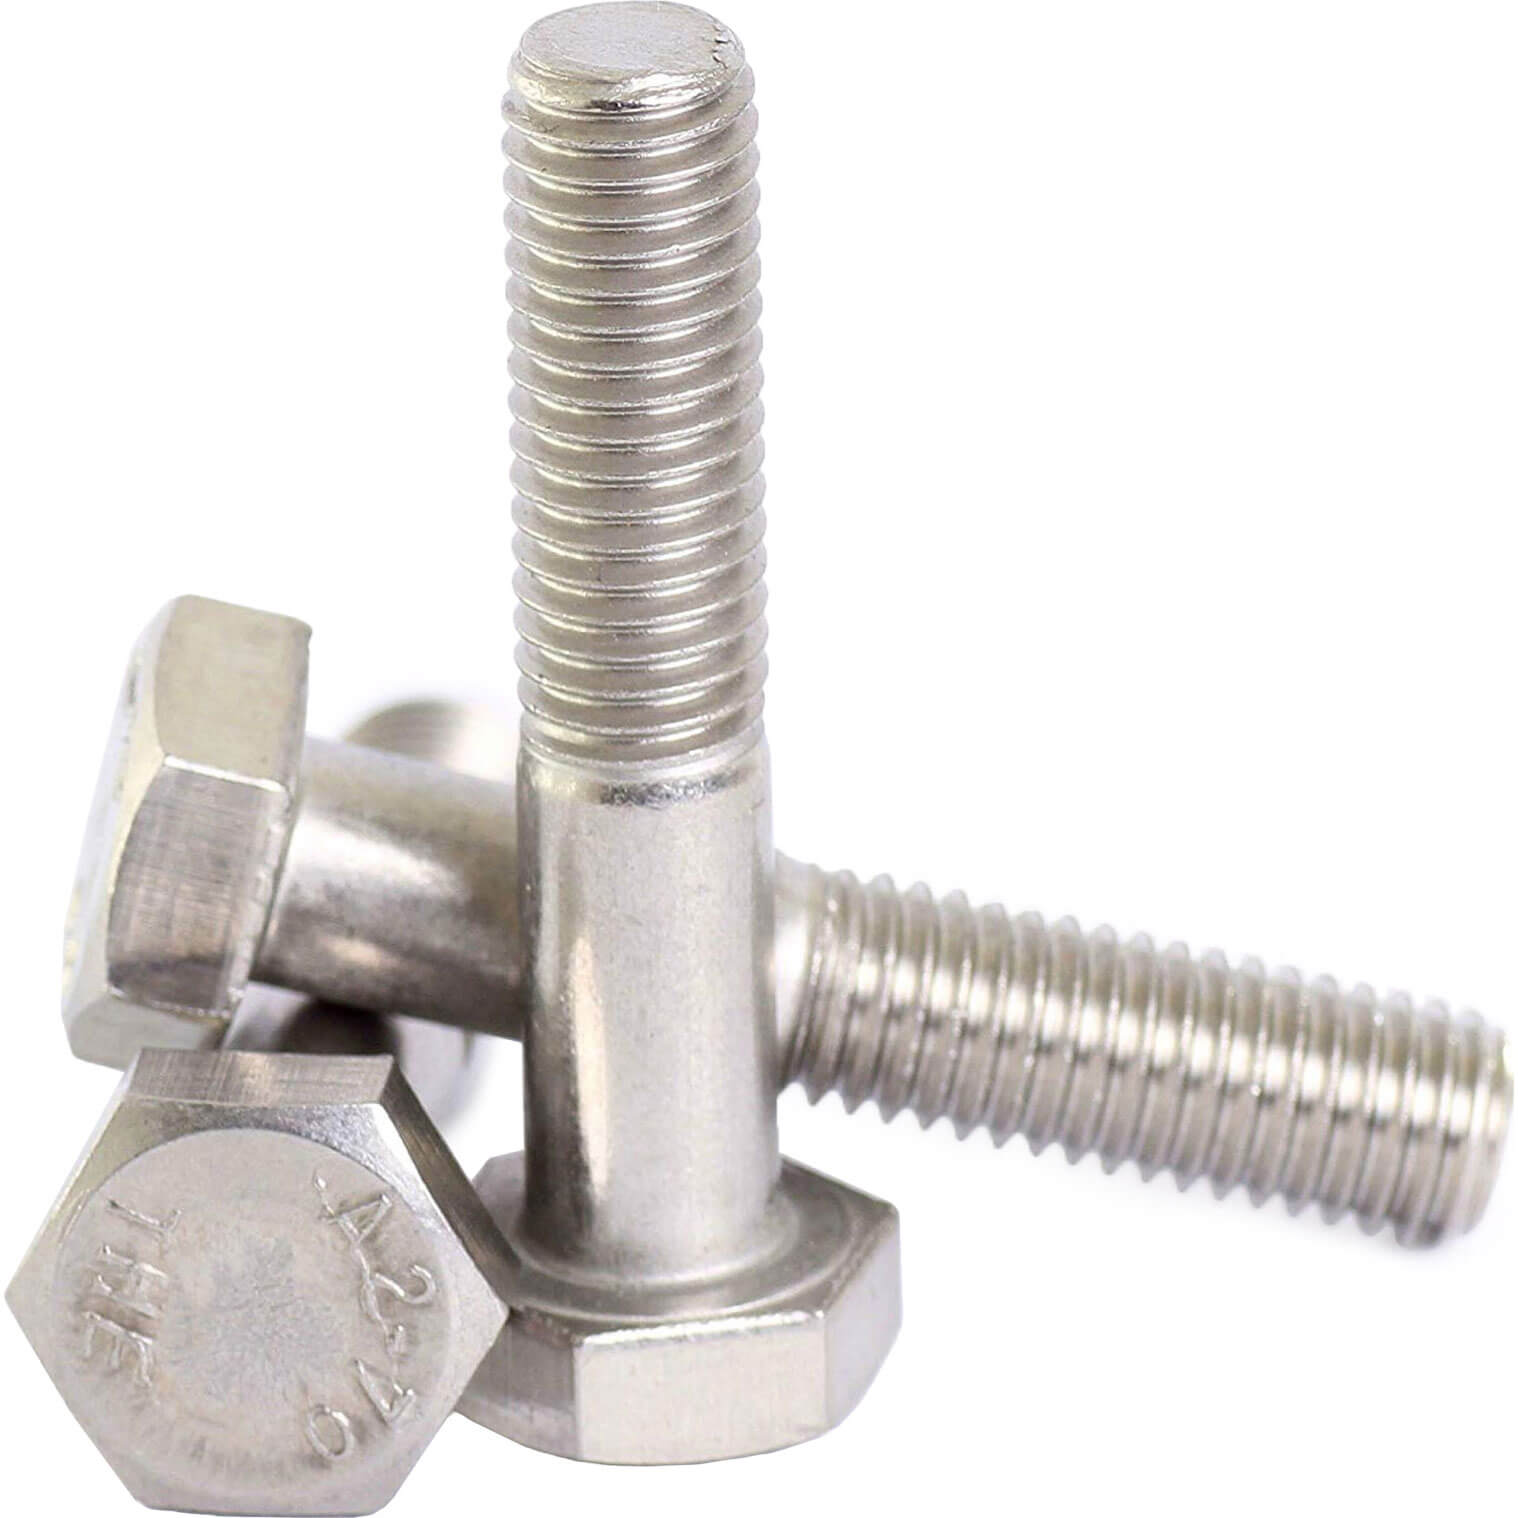 Image of Sirius Bolts A2 304 Stainless Steel M10 60mm Pack of 1